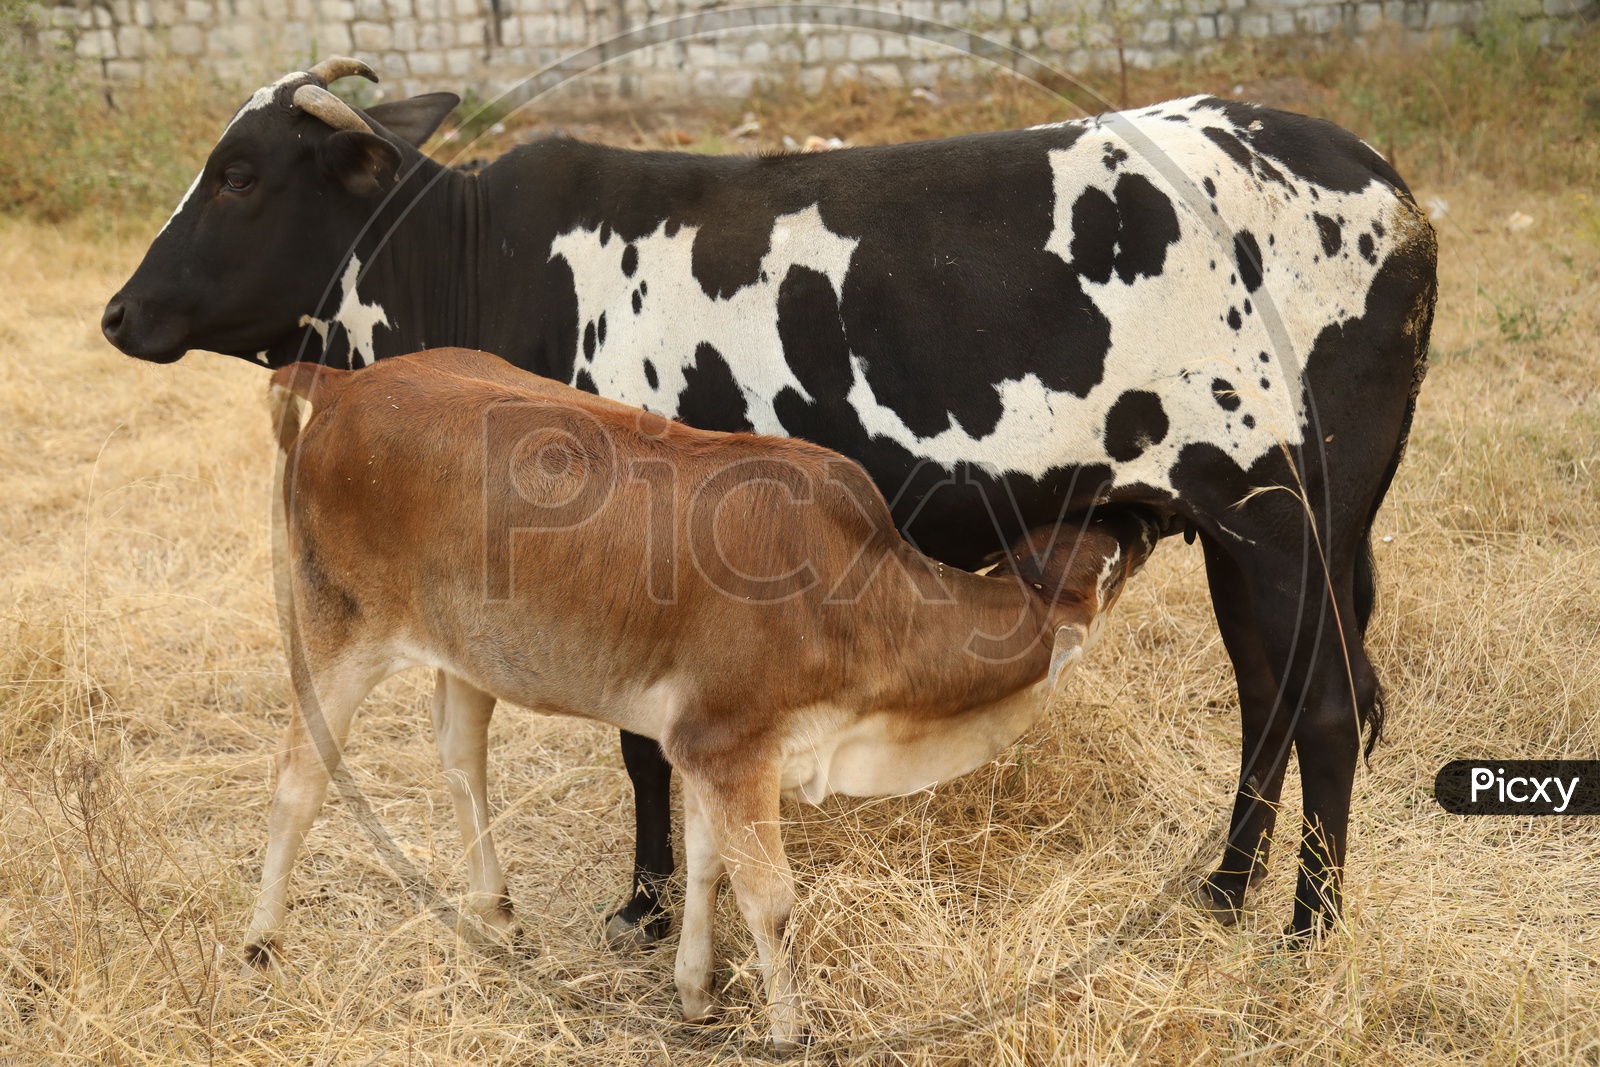 A calf drinking milk from its mother